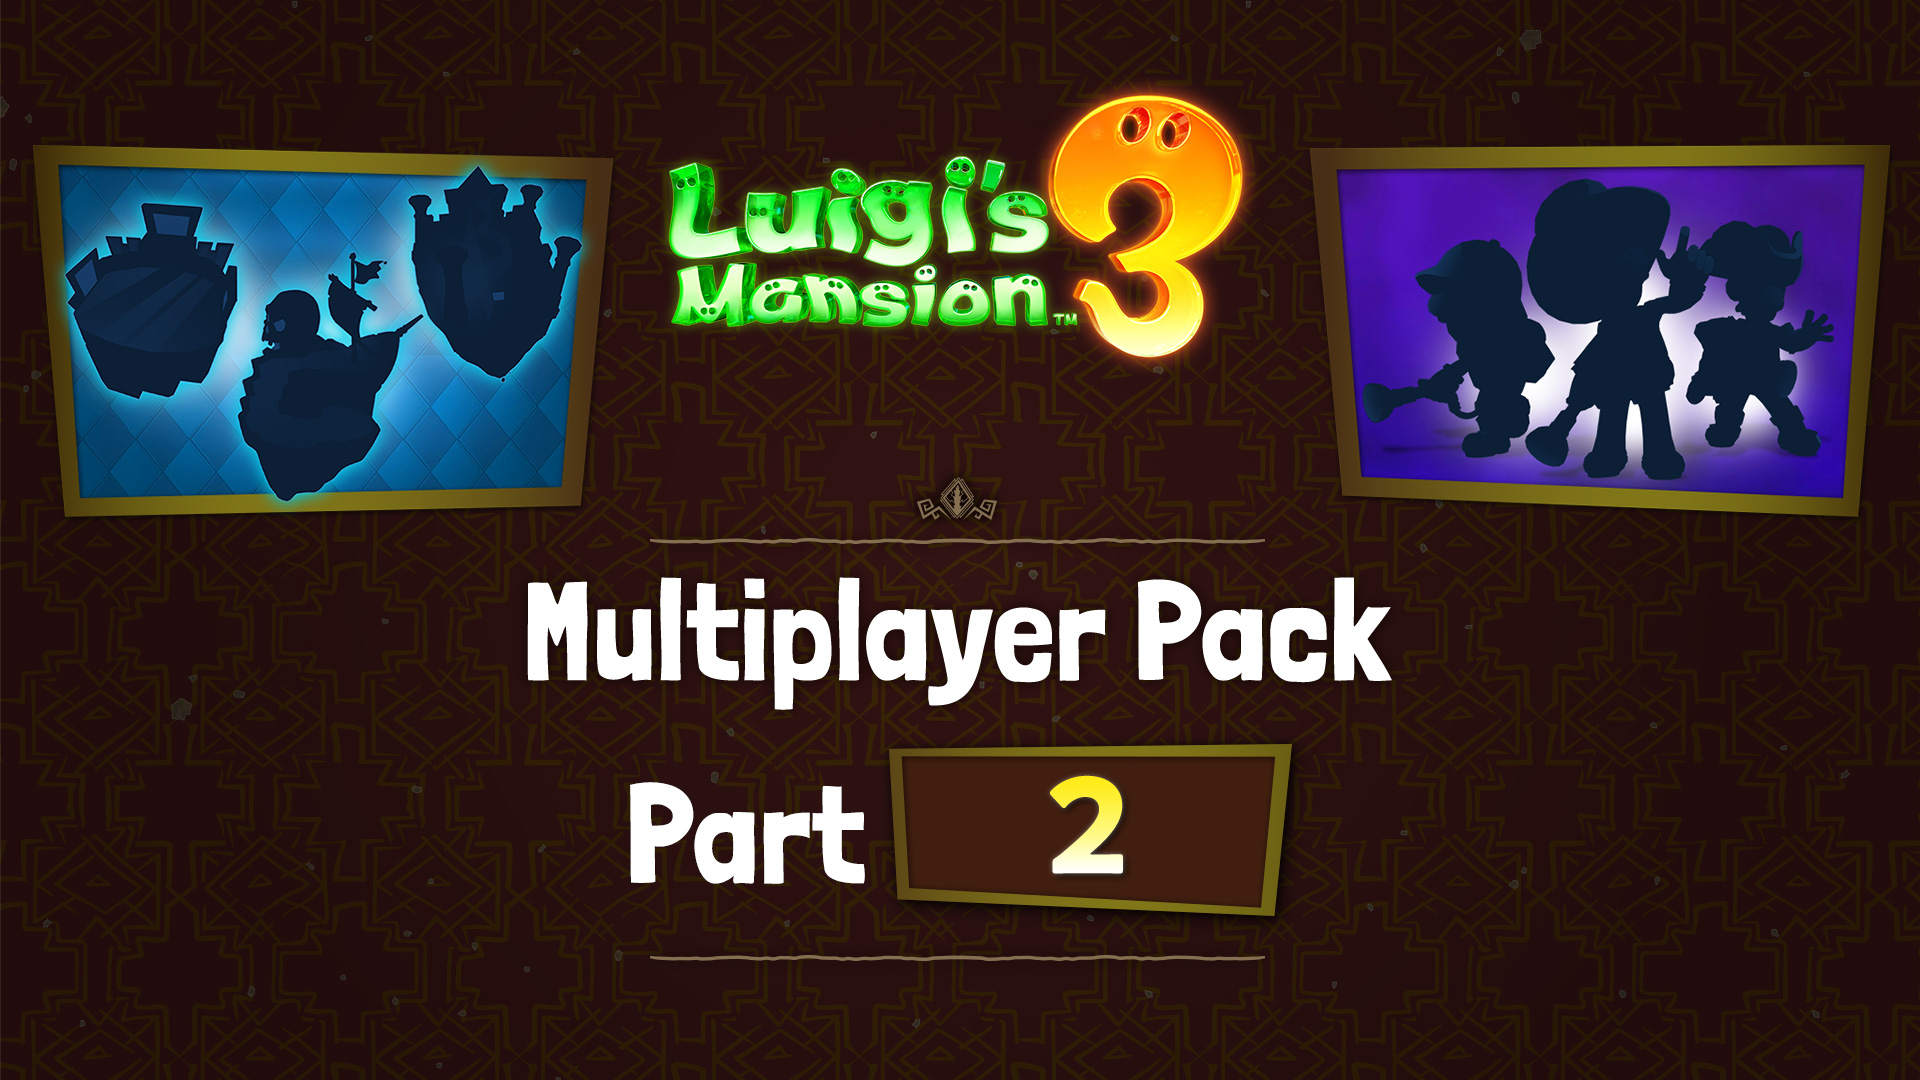 Multiplayer Pack Part 2